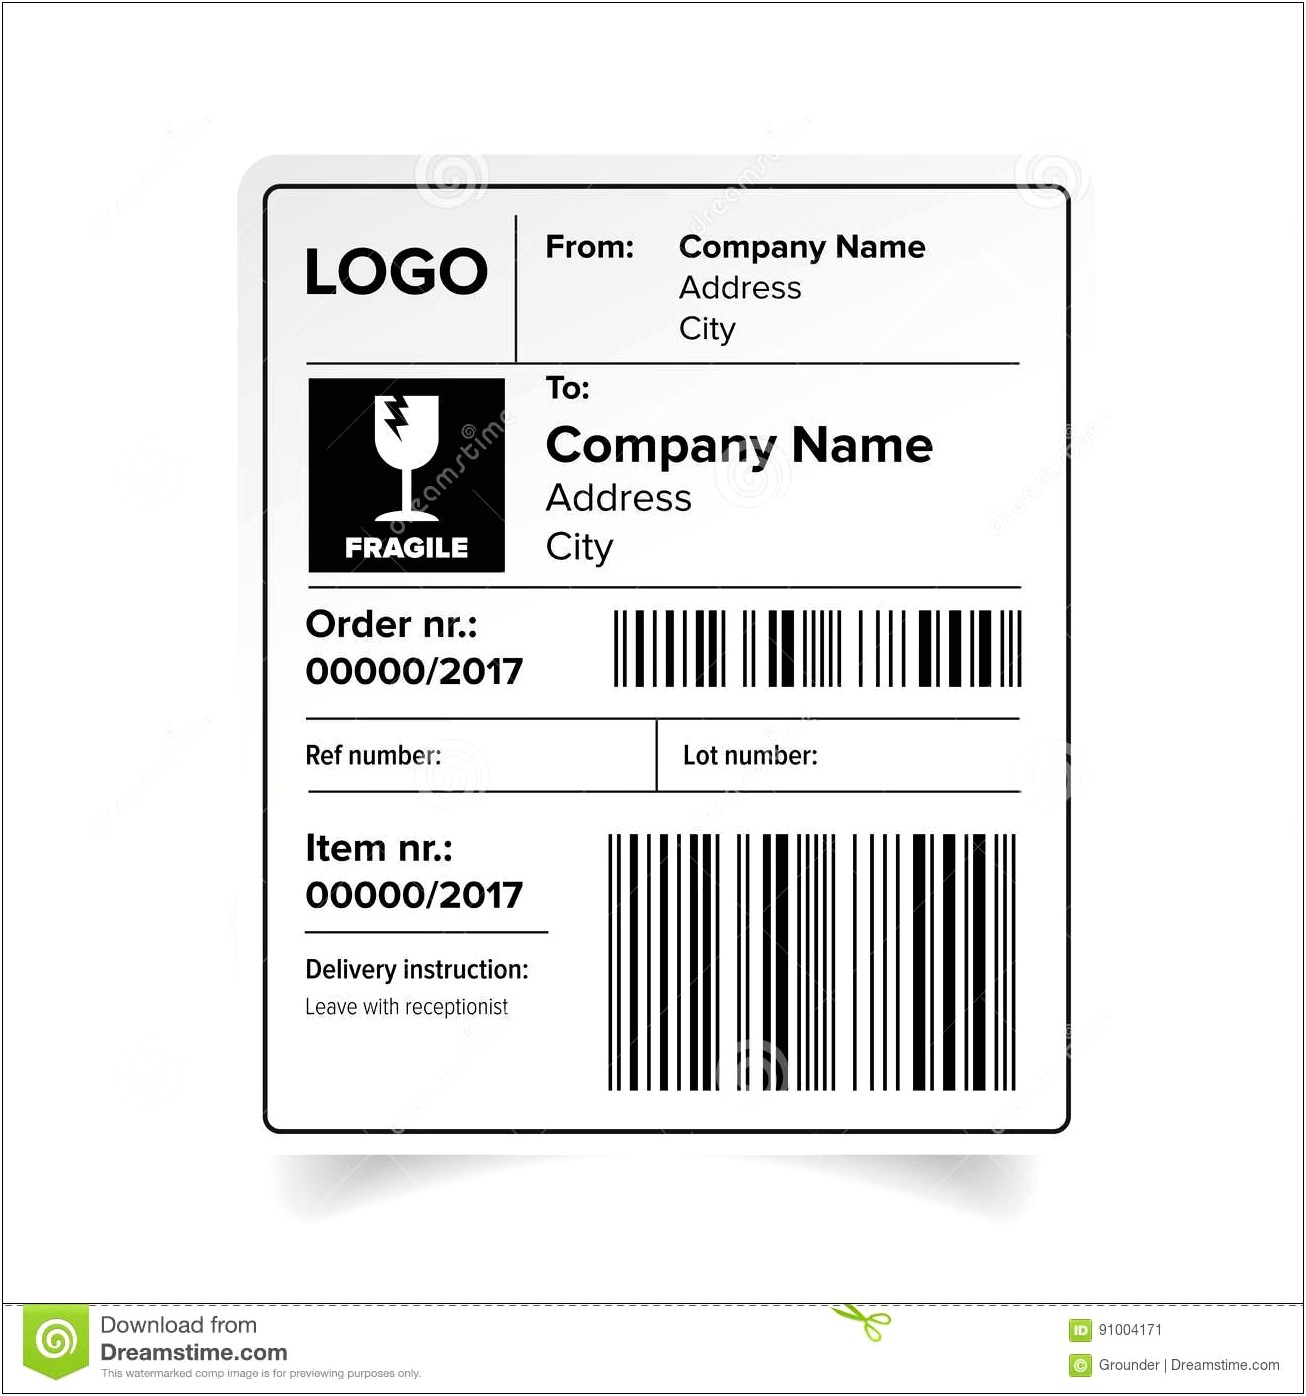 Free Mailing Label Template For Packages